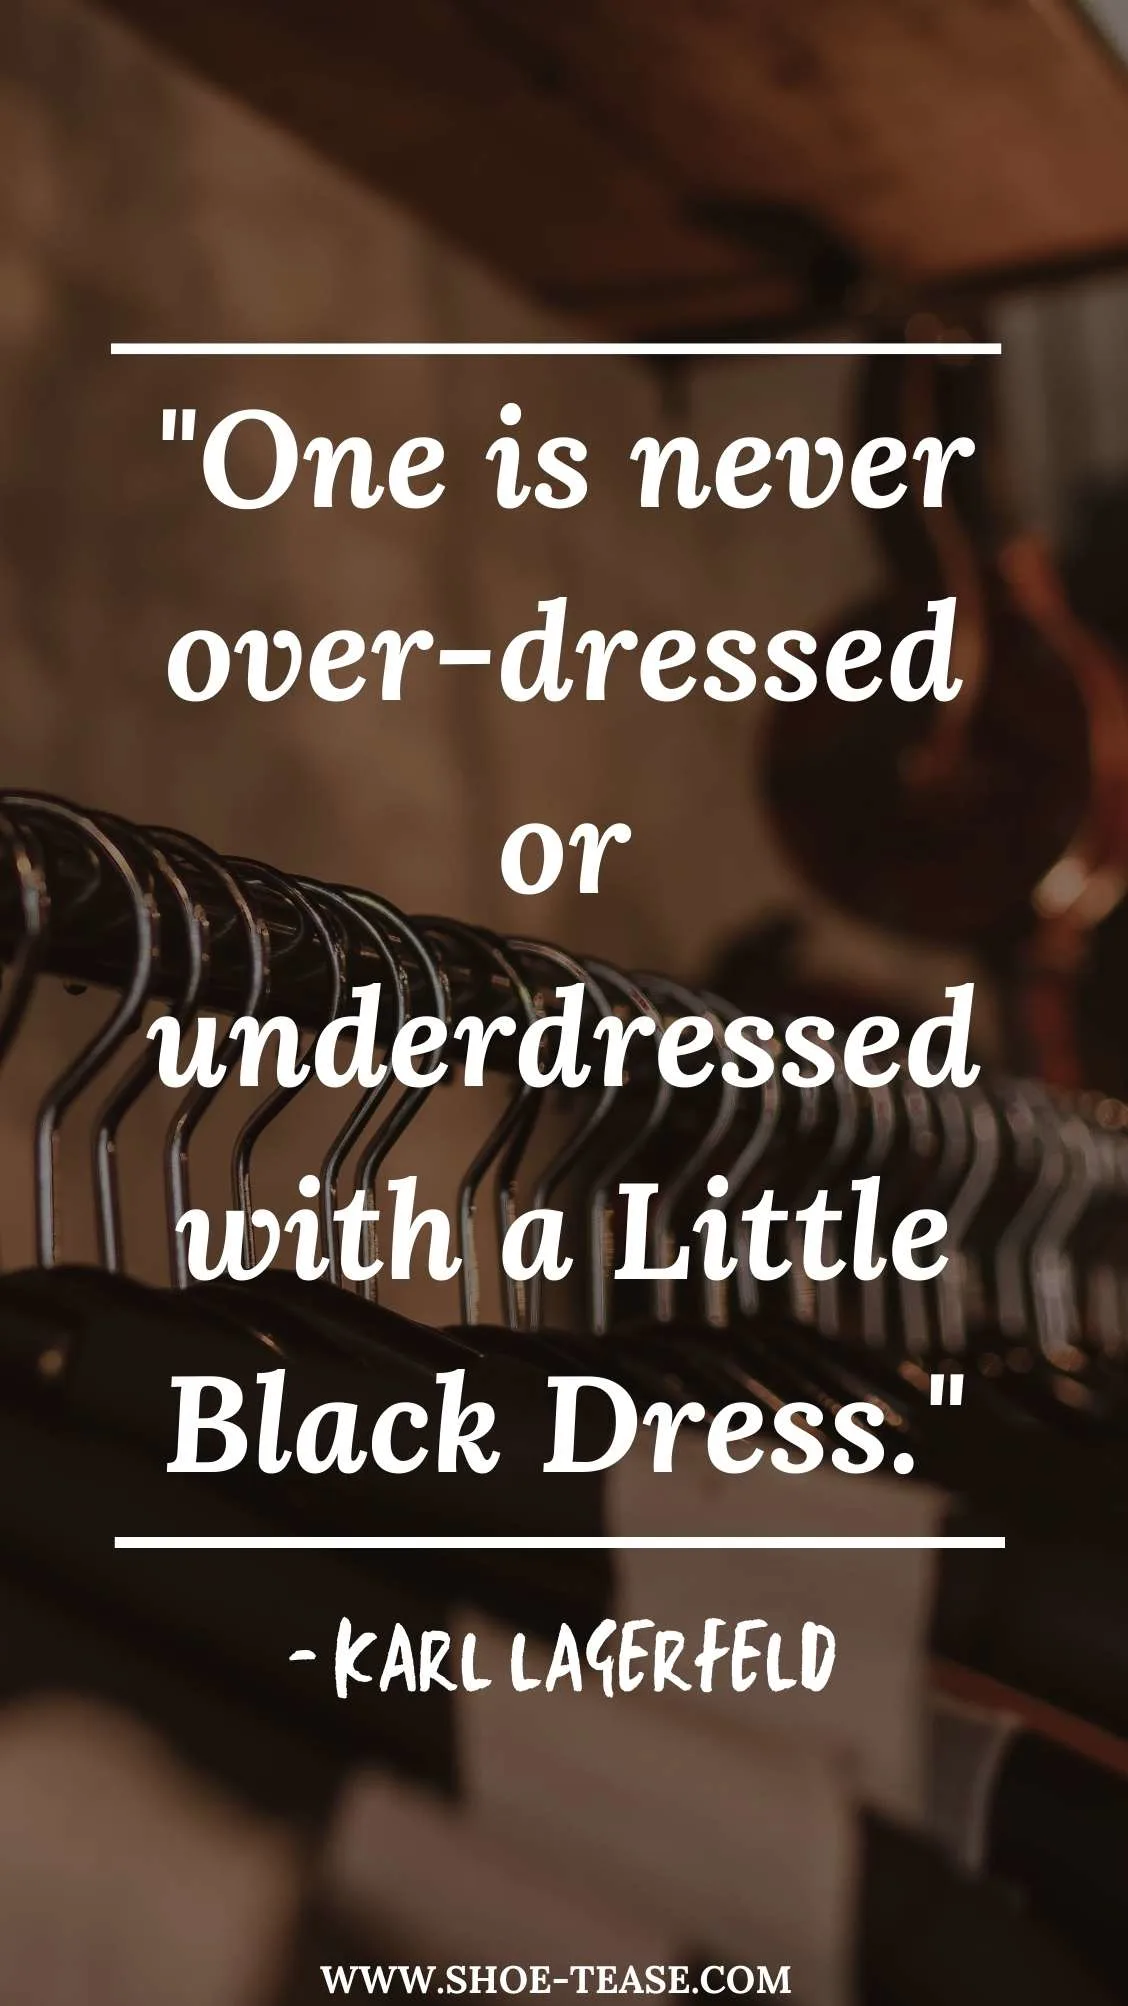 80 Timeless Black Dress Quotes and Captions for Instagram